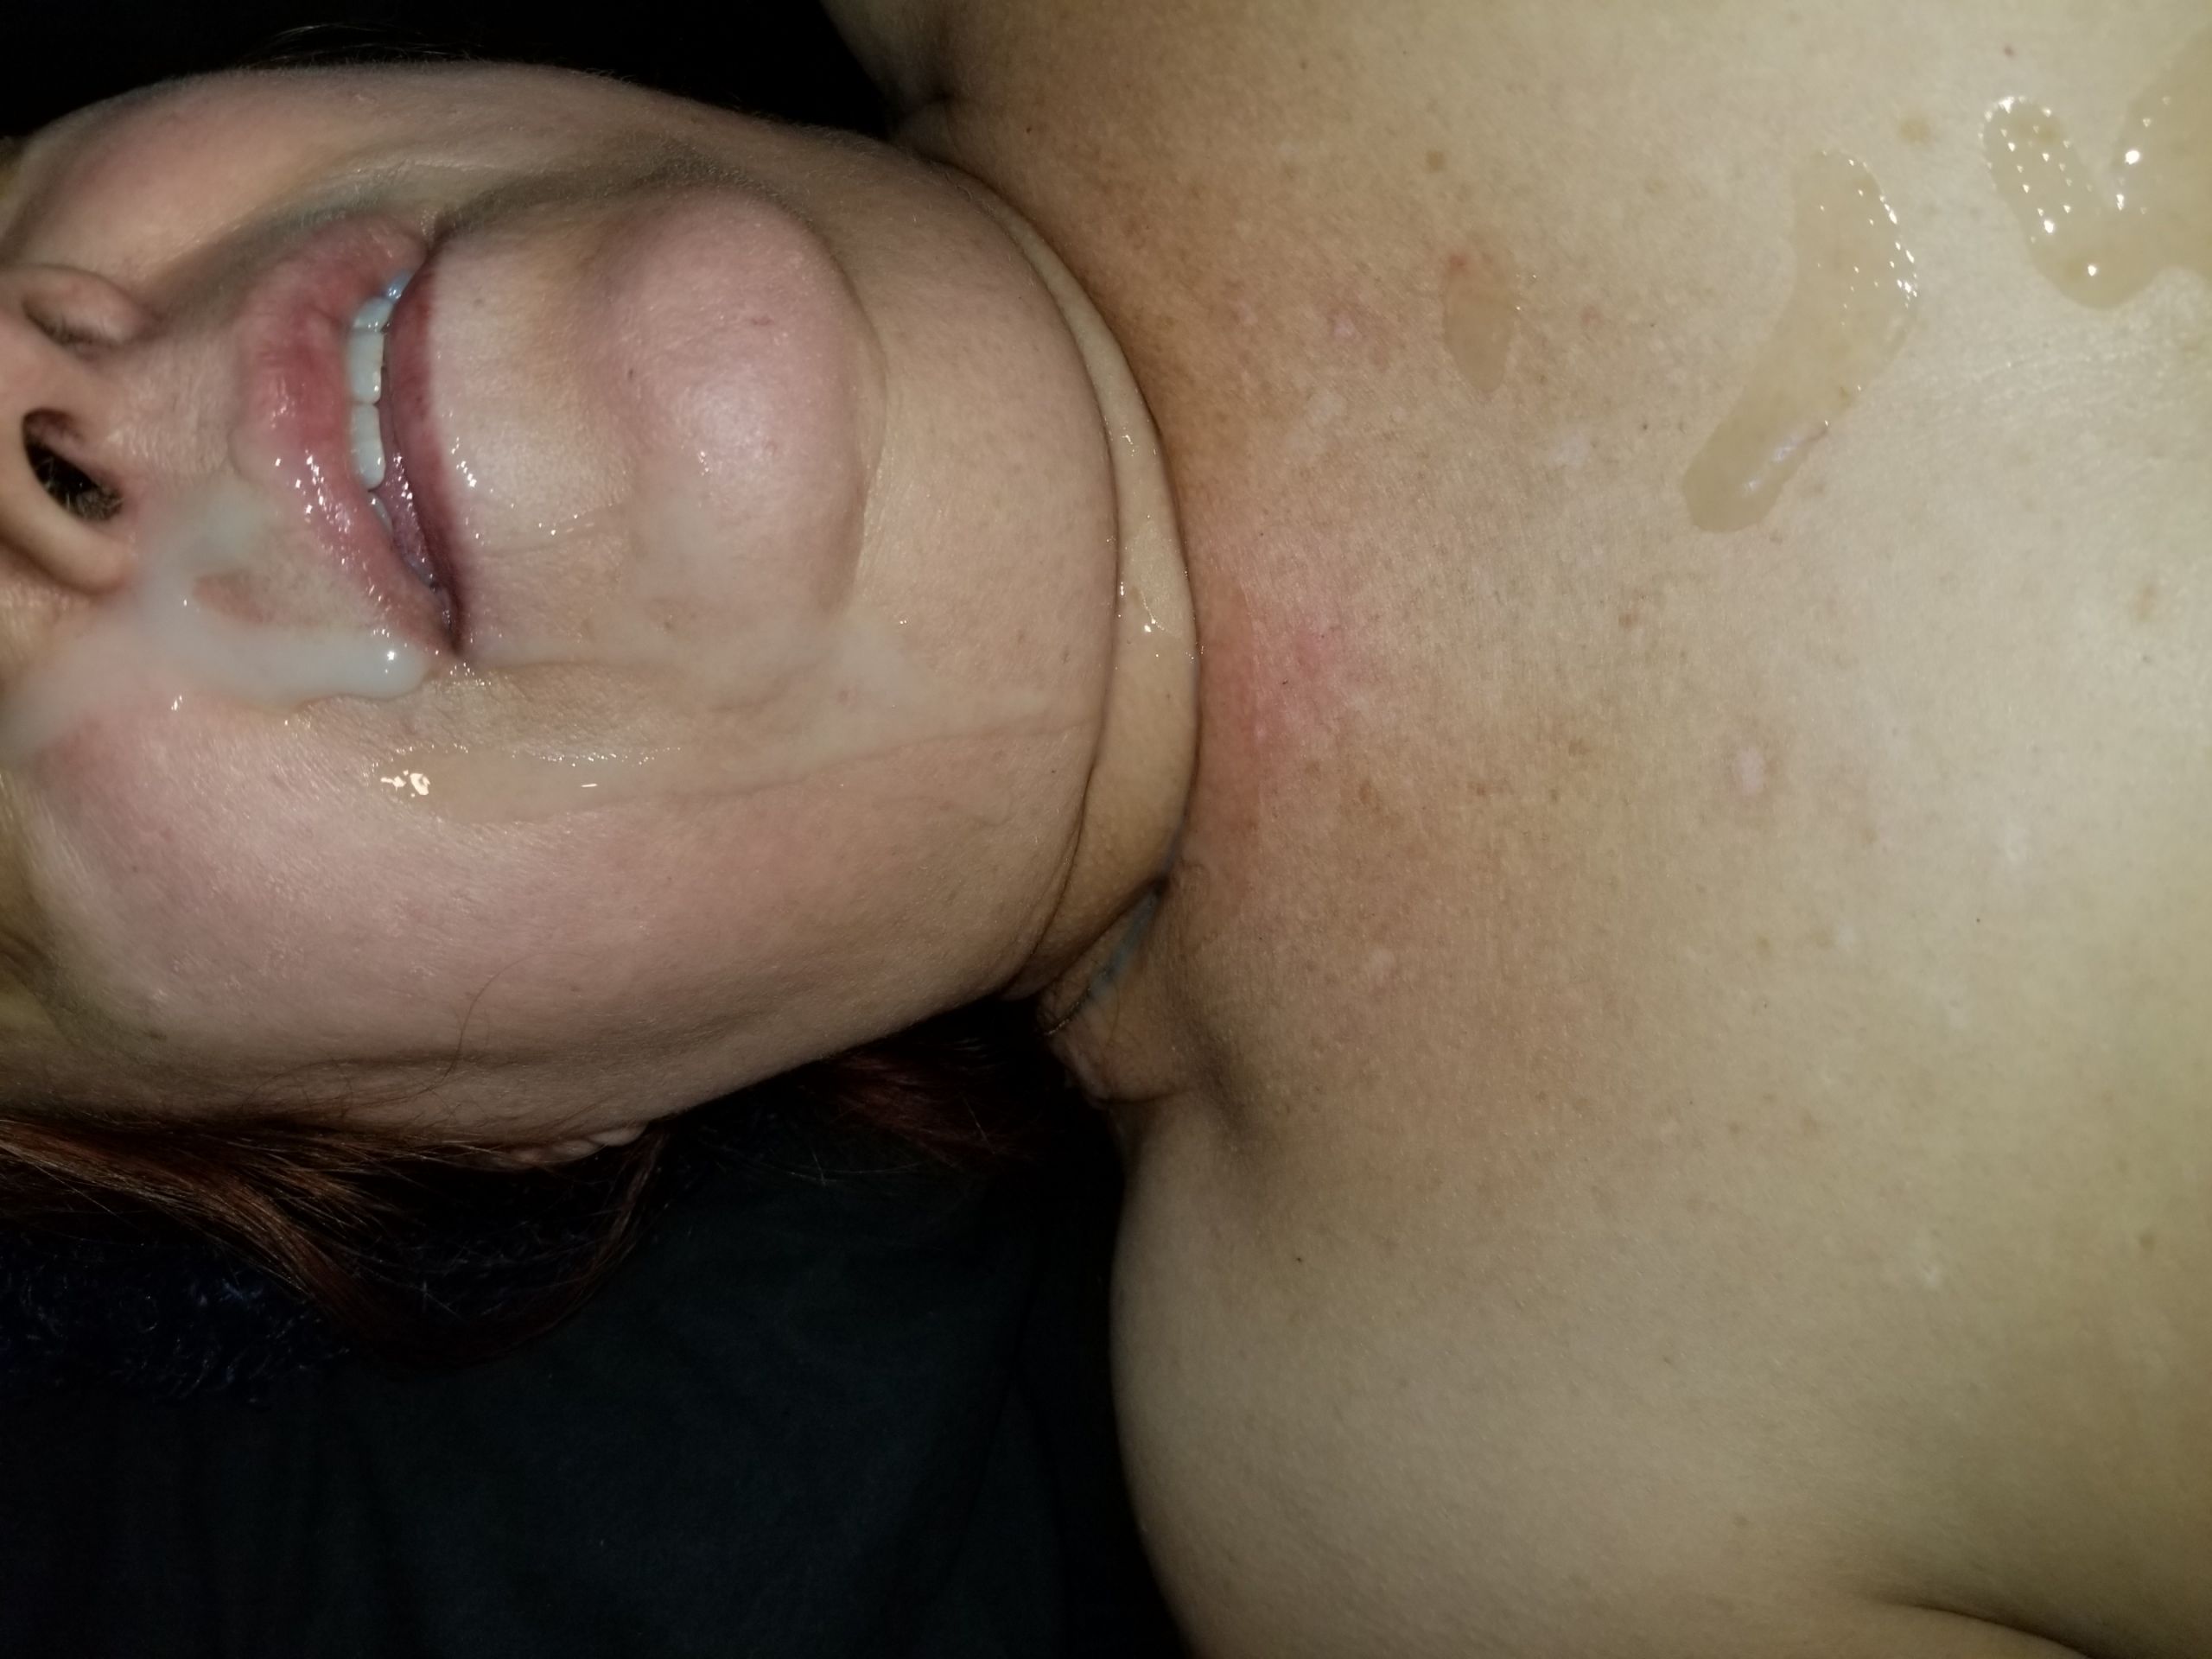 Laurie Covered in Cum